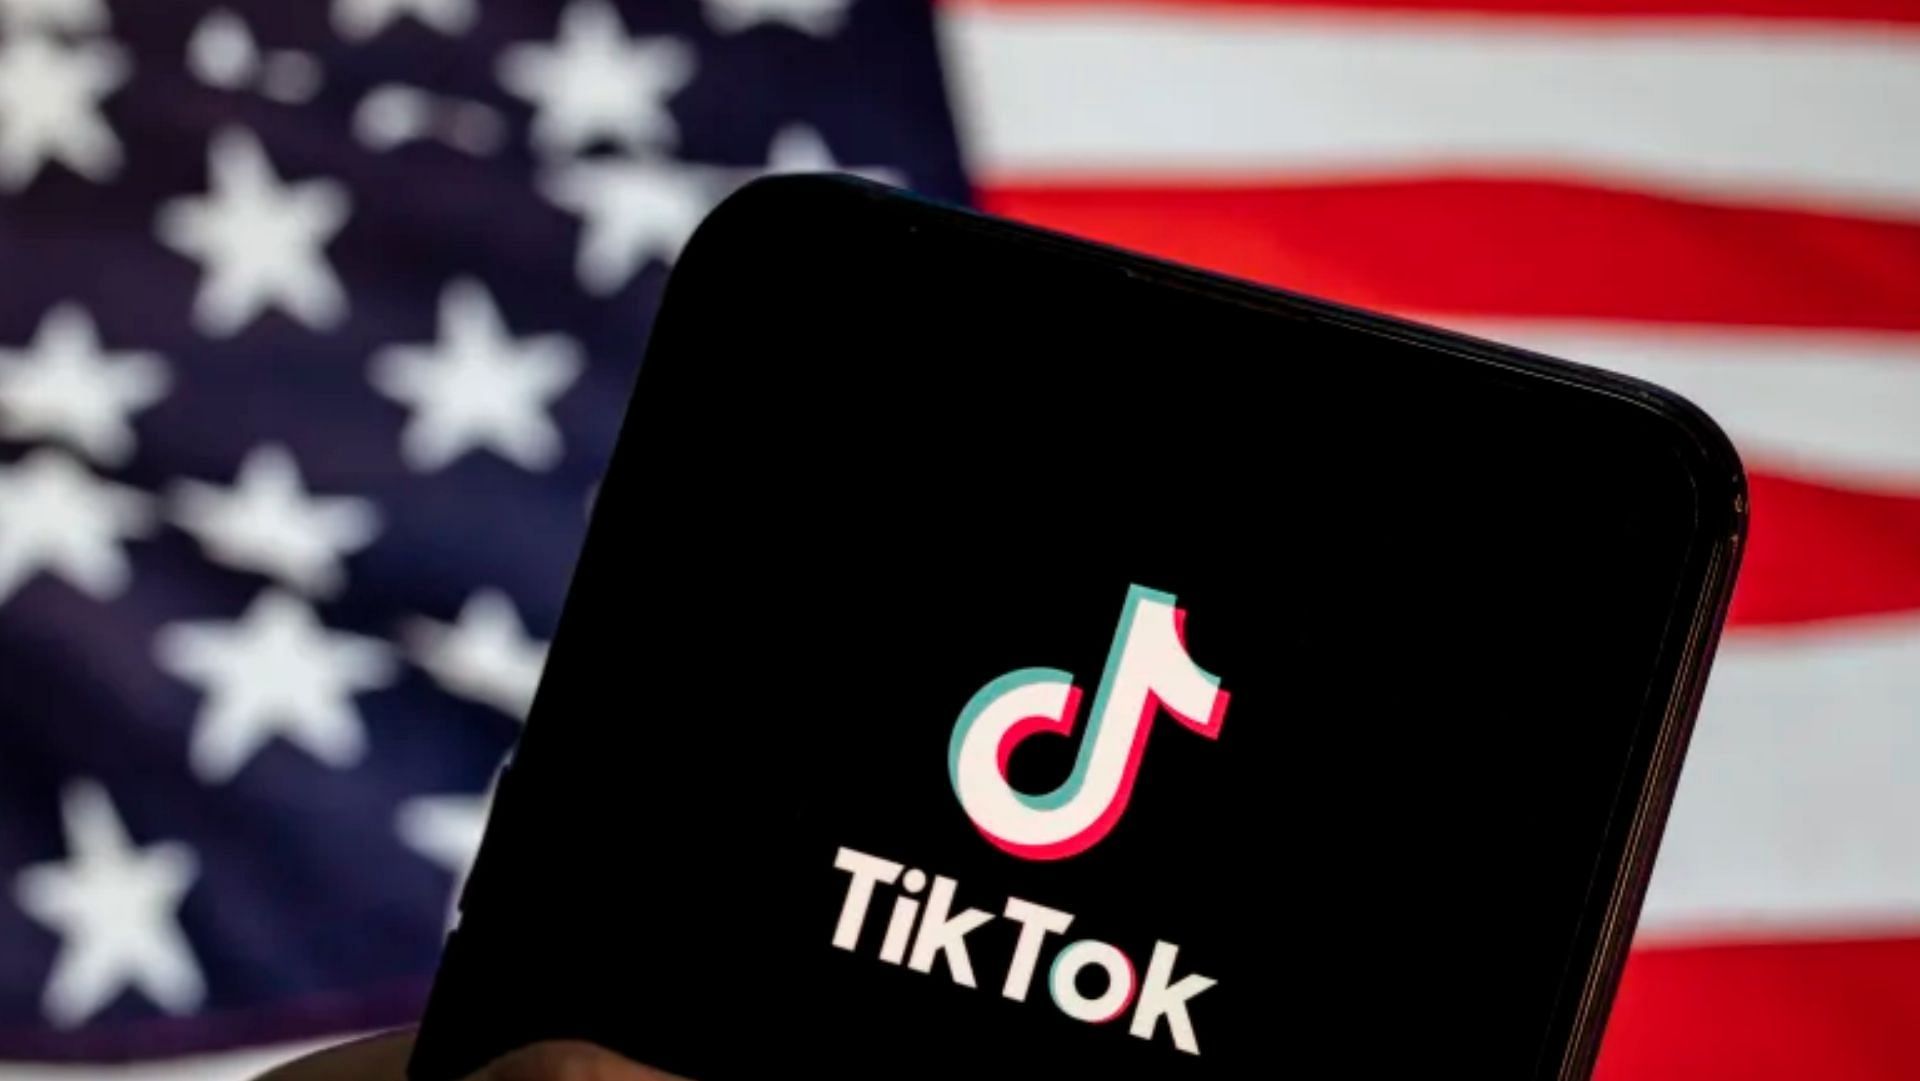 U.S. Lawmakers proposed a new bill in the Congress to ban TikTok due to national security concerns (Image via Budrul Chukrut/SOPA Images)